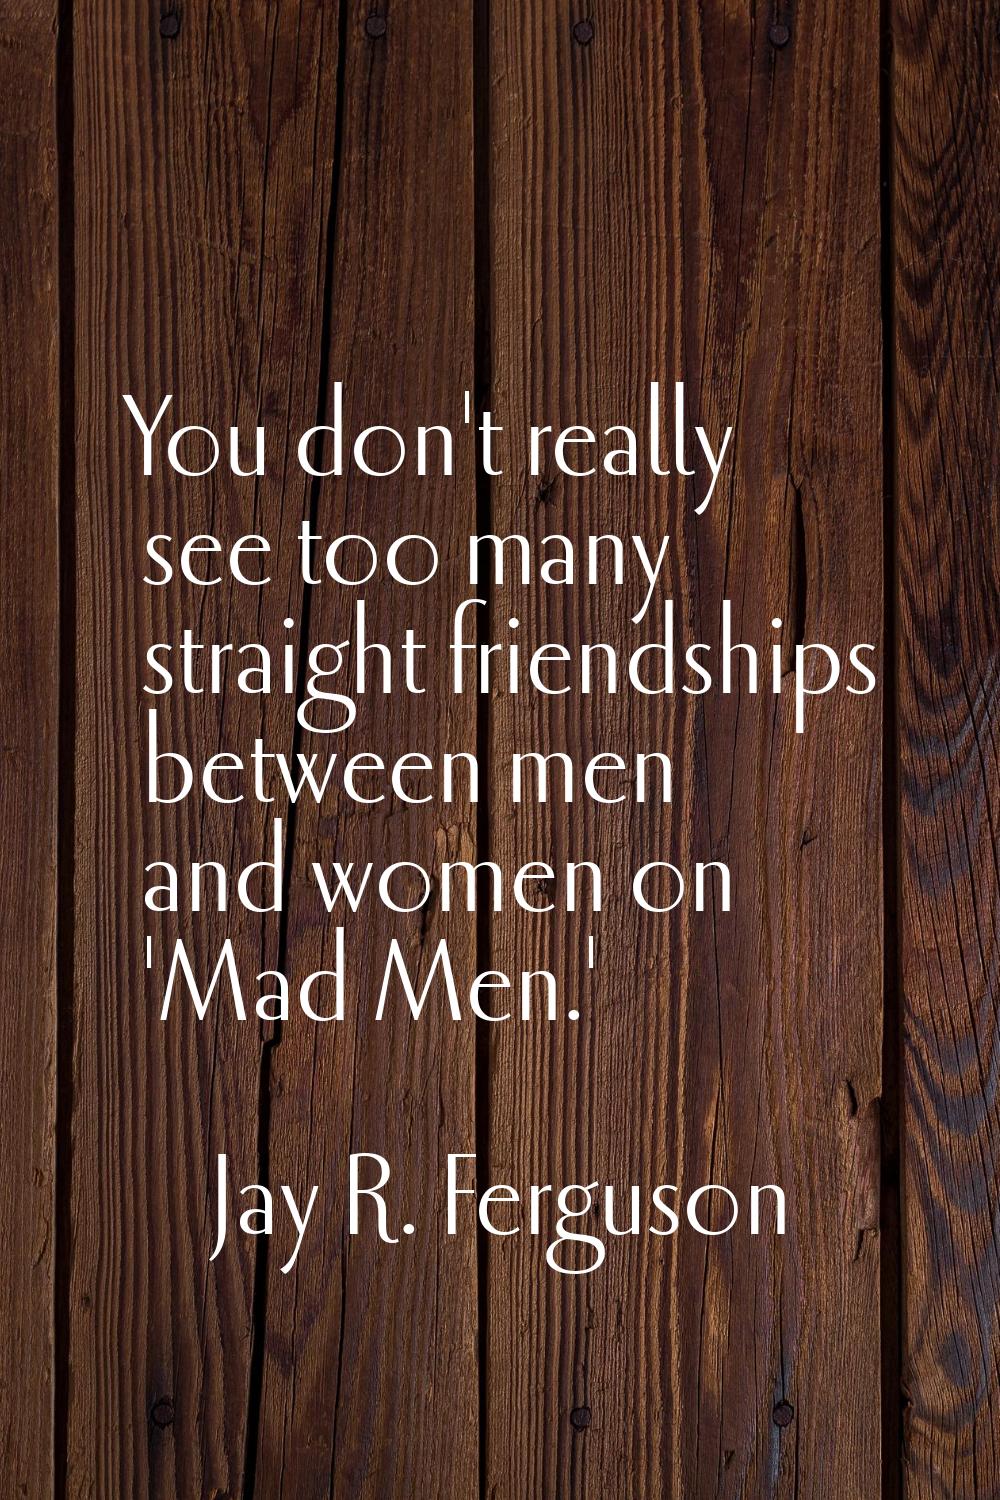 You don't really see too many straight friendships between men and women on 'Mad Men.'